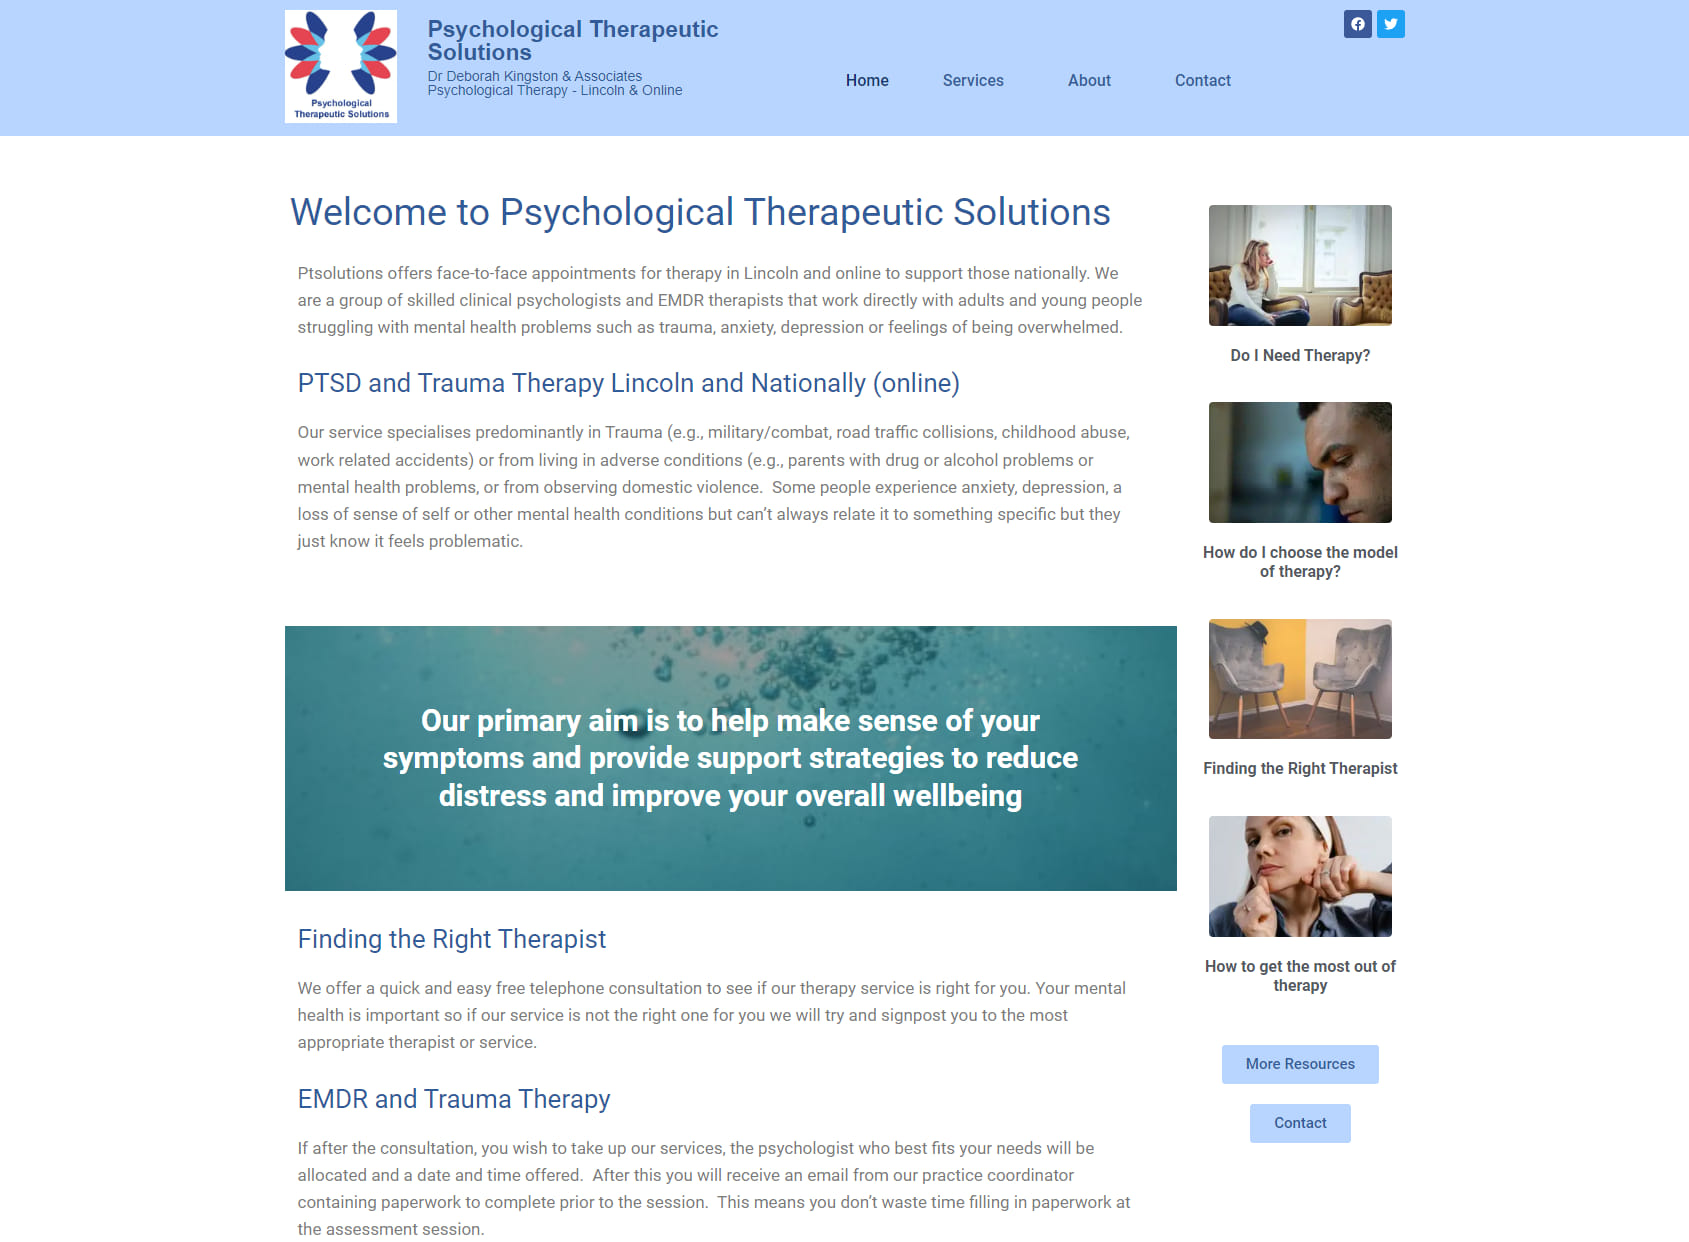 Psychological Therapeutic Solutions